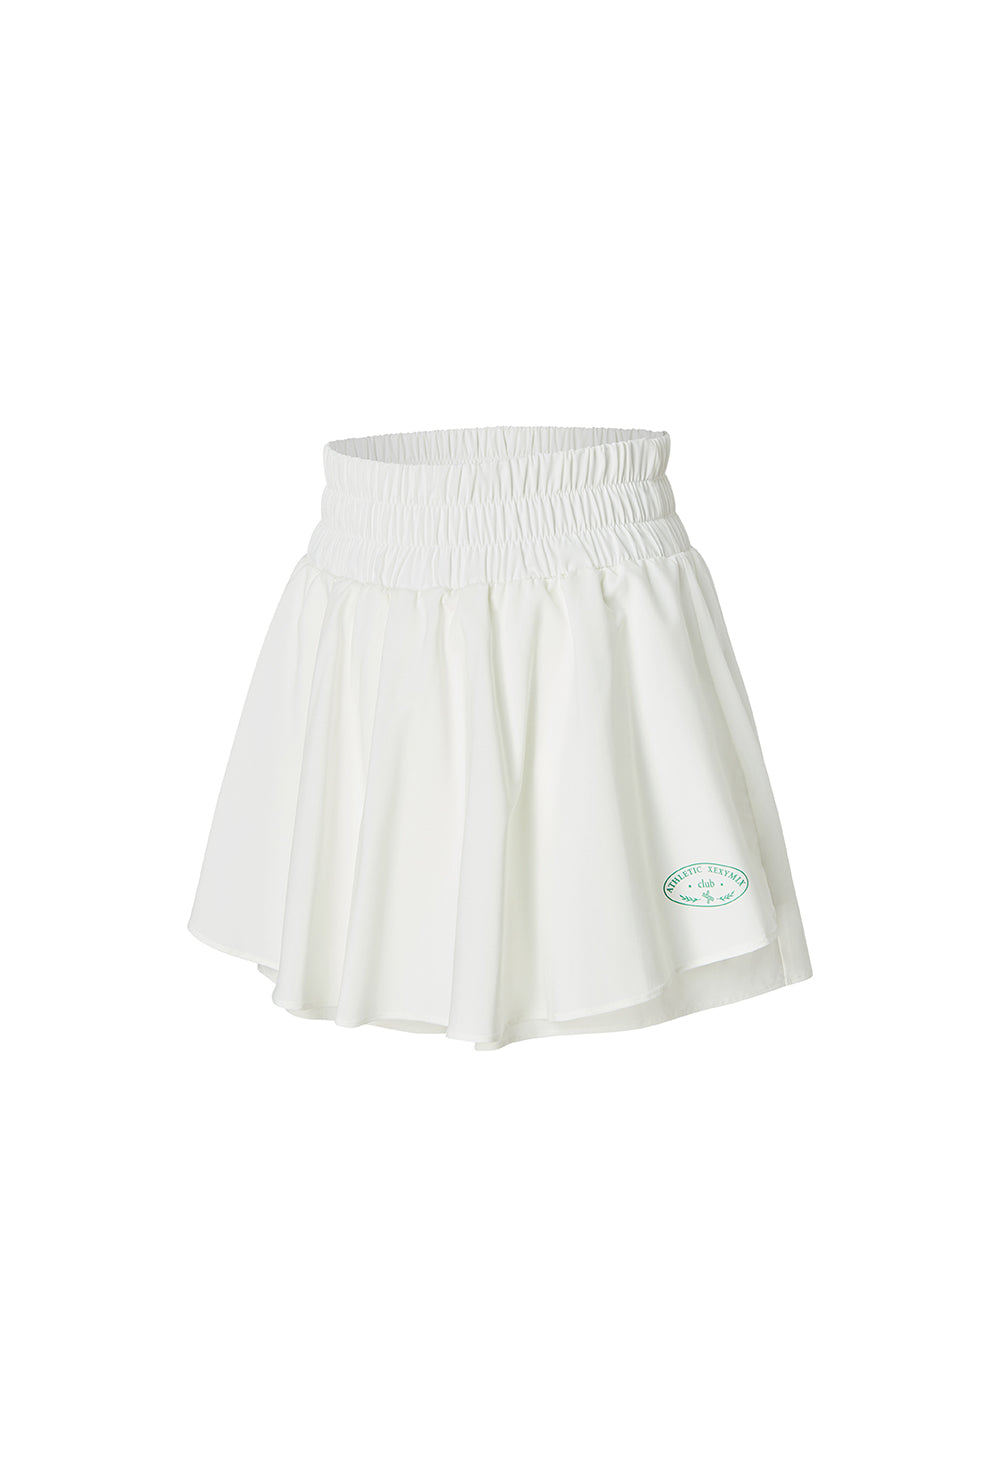 2-in-1 Layered Shorts - Ivory